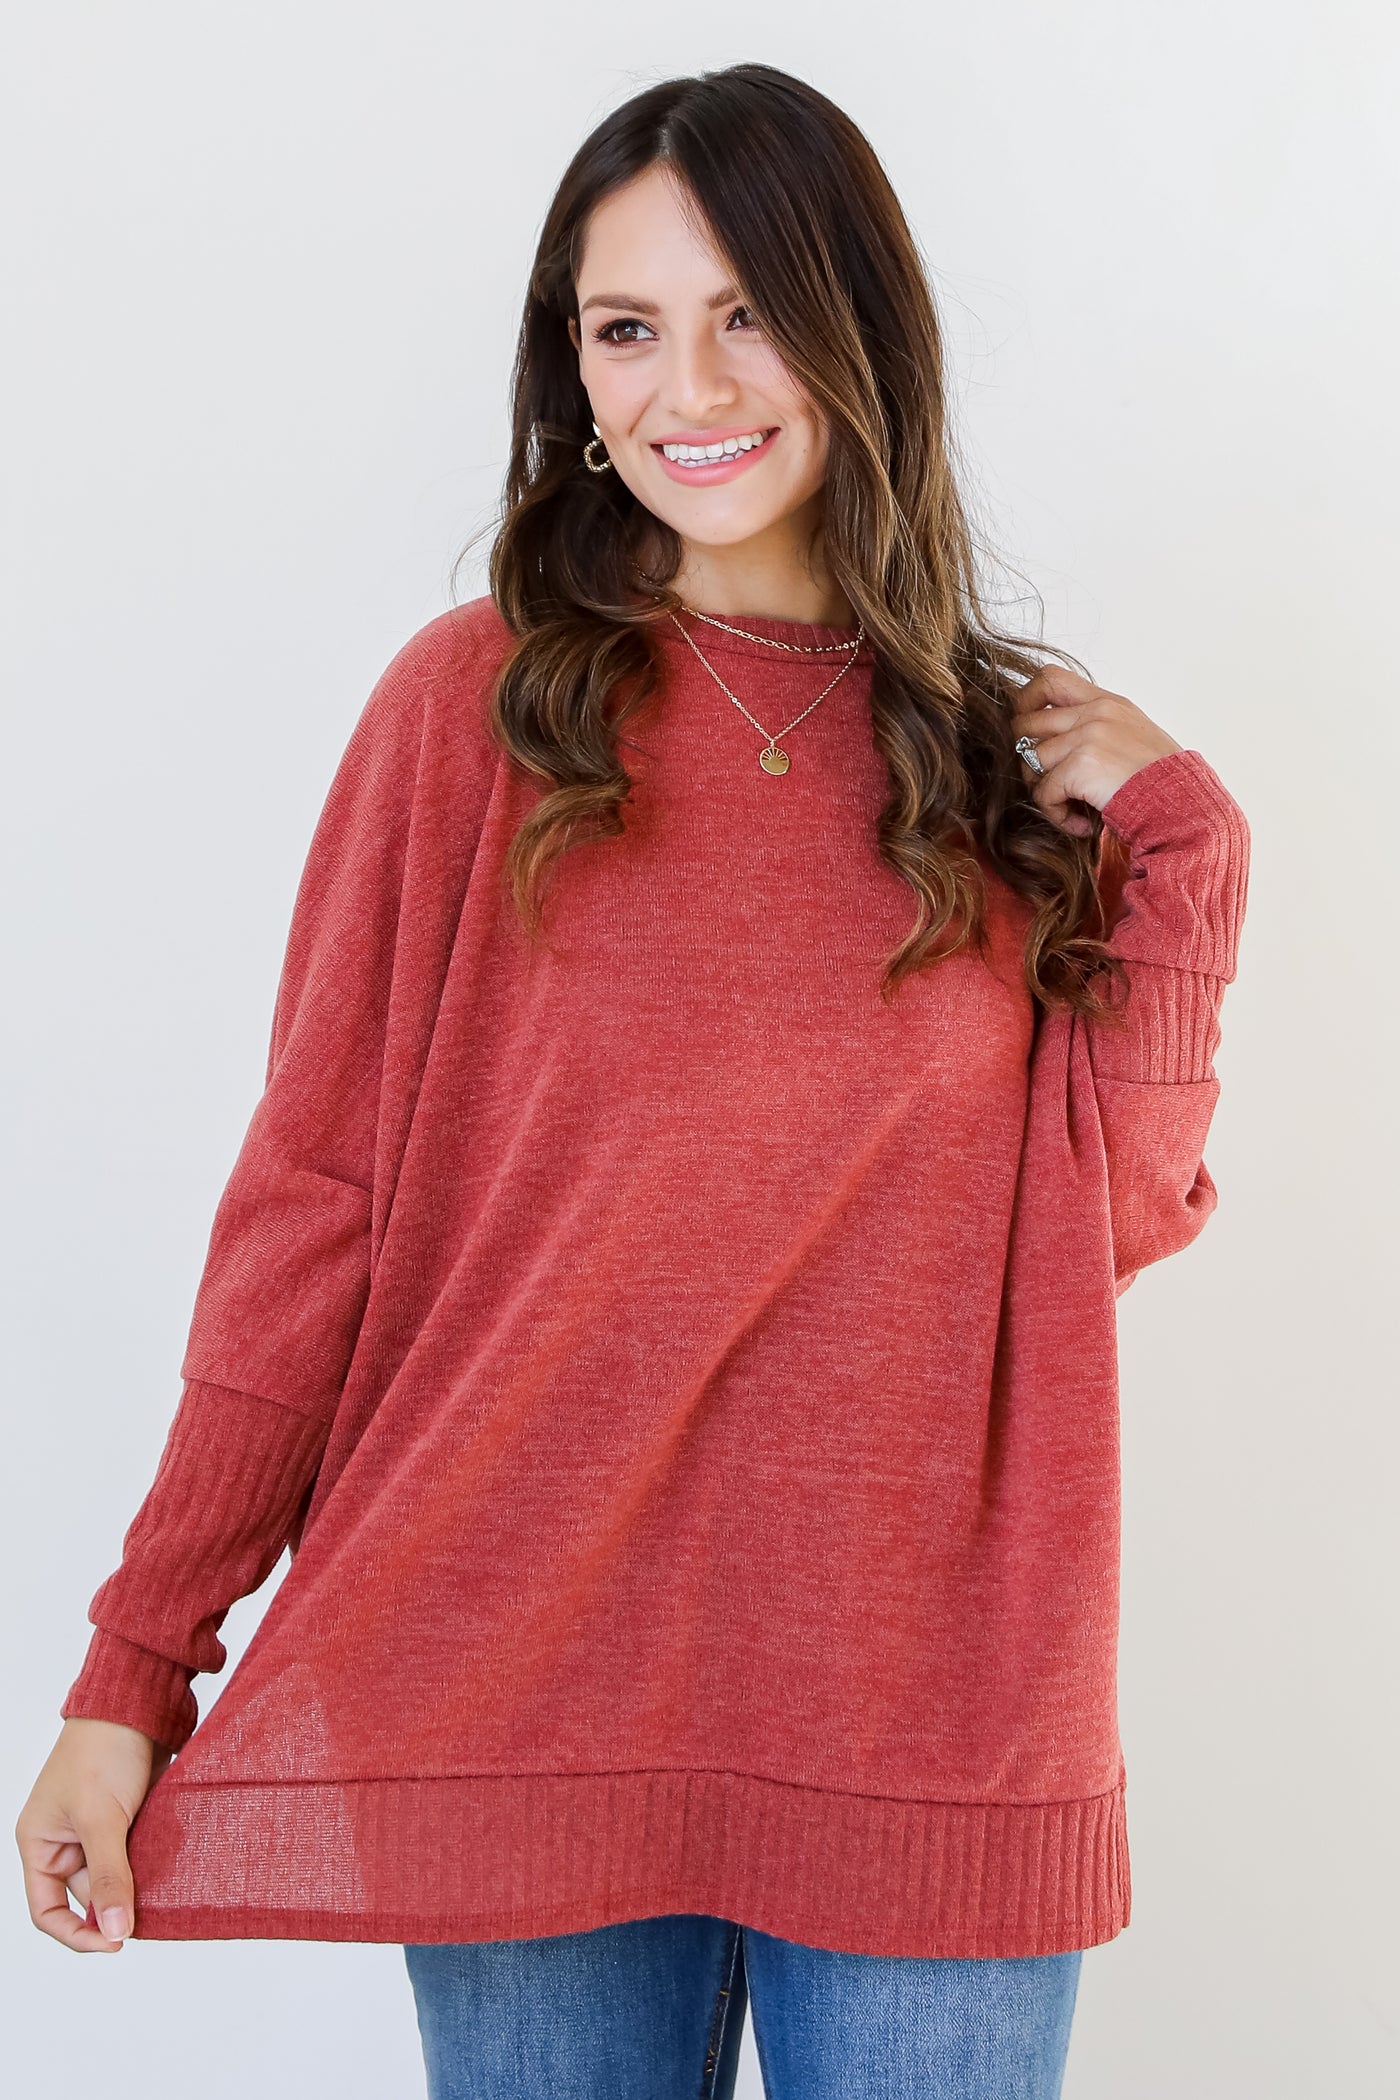 red Knit Top on model